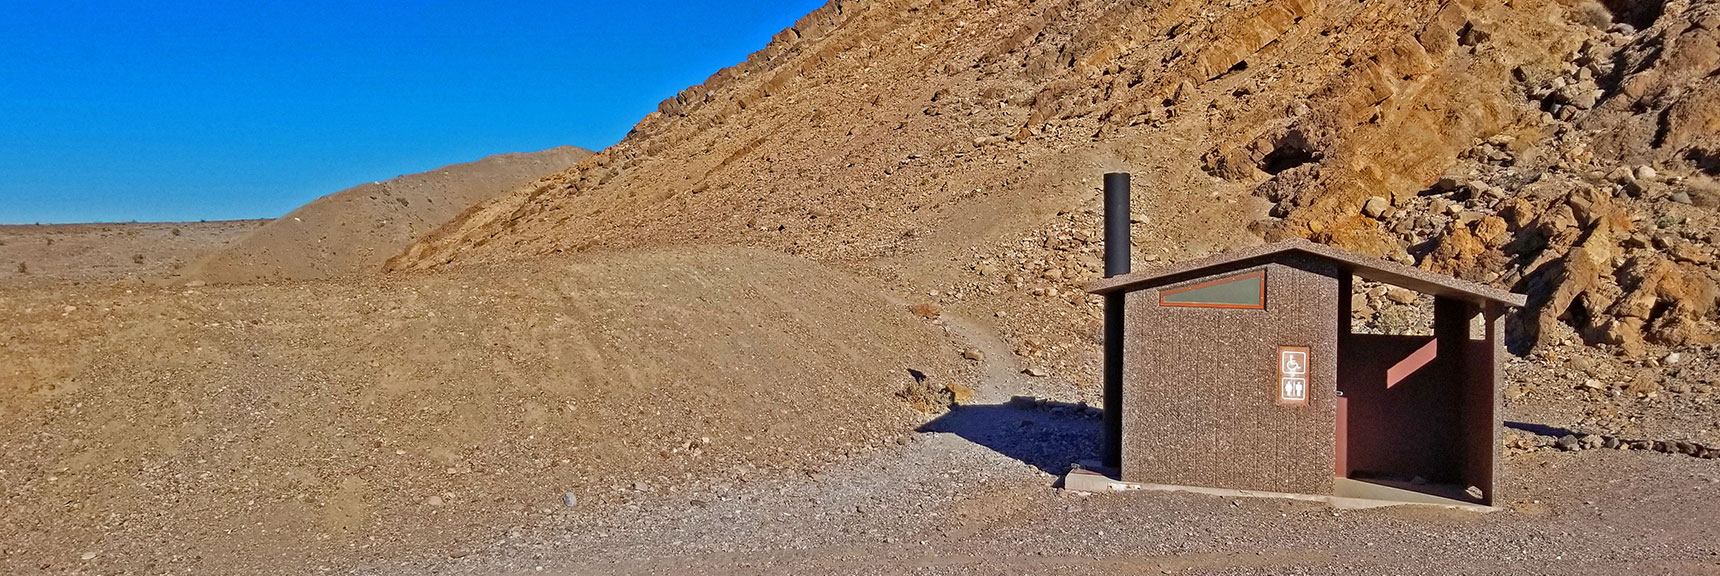 Fall Canyon Trailhead to the Left and Behind the Titus Canyon Restroom | Fall Canyon | Death Valley National Park, California